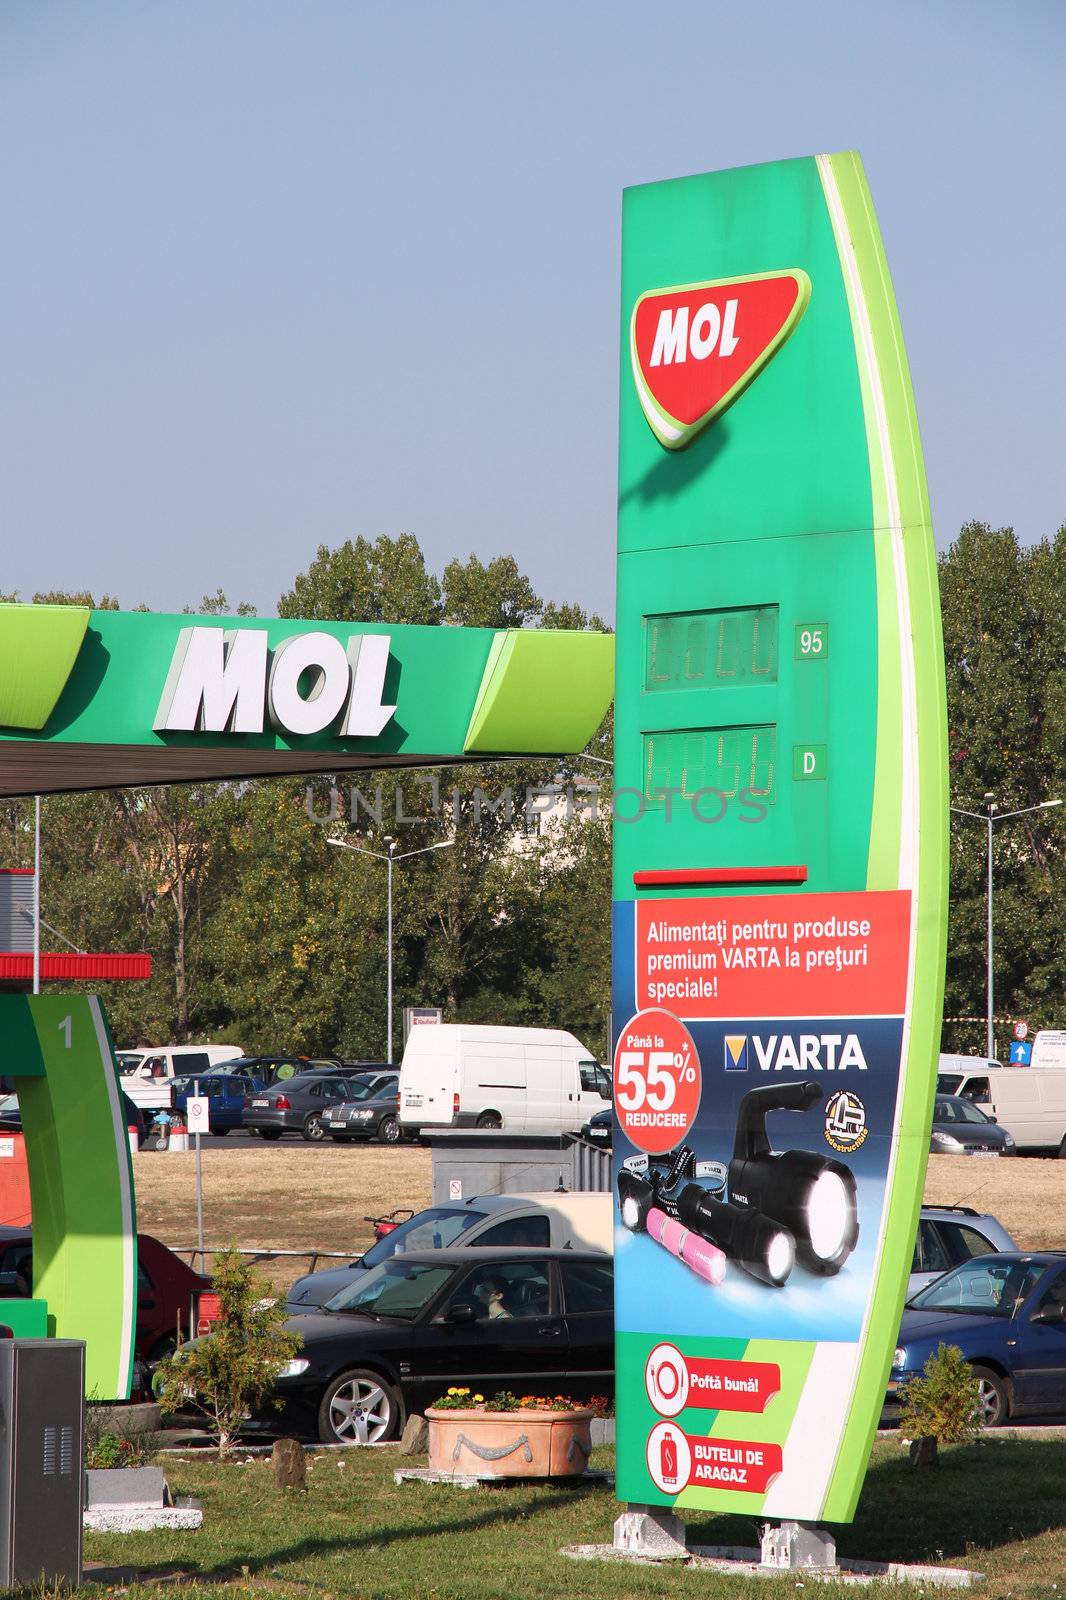 SIBIU, ROMANIA - AUGUST 24: Drivers fill up their tanks on MOL station on August 24, 2012 in Sibiu, Romania. MOL employs 31,732 people (2011) and has 1,635 filling stations (2011) internationally.